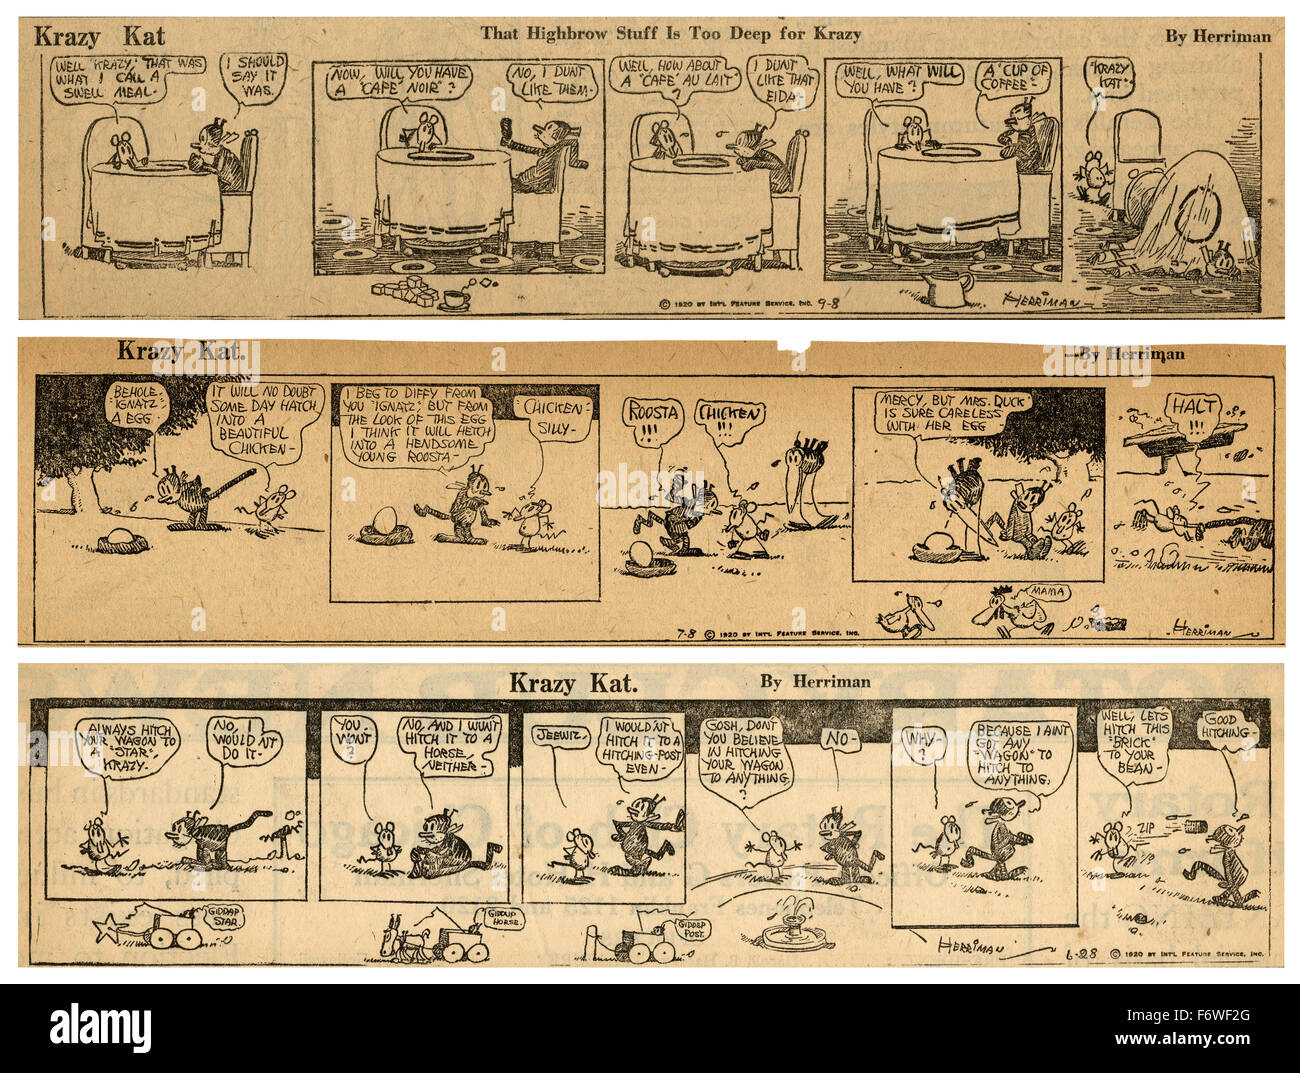 Three 1920 Krazy Kat comic strips by George Herriman, featuring Krazy Kat and Ignatz Mouse. Stock Photo